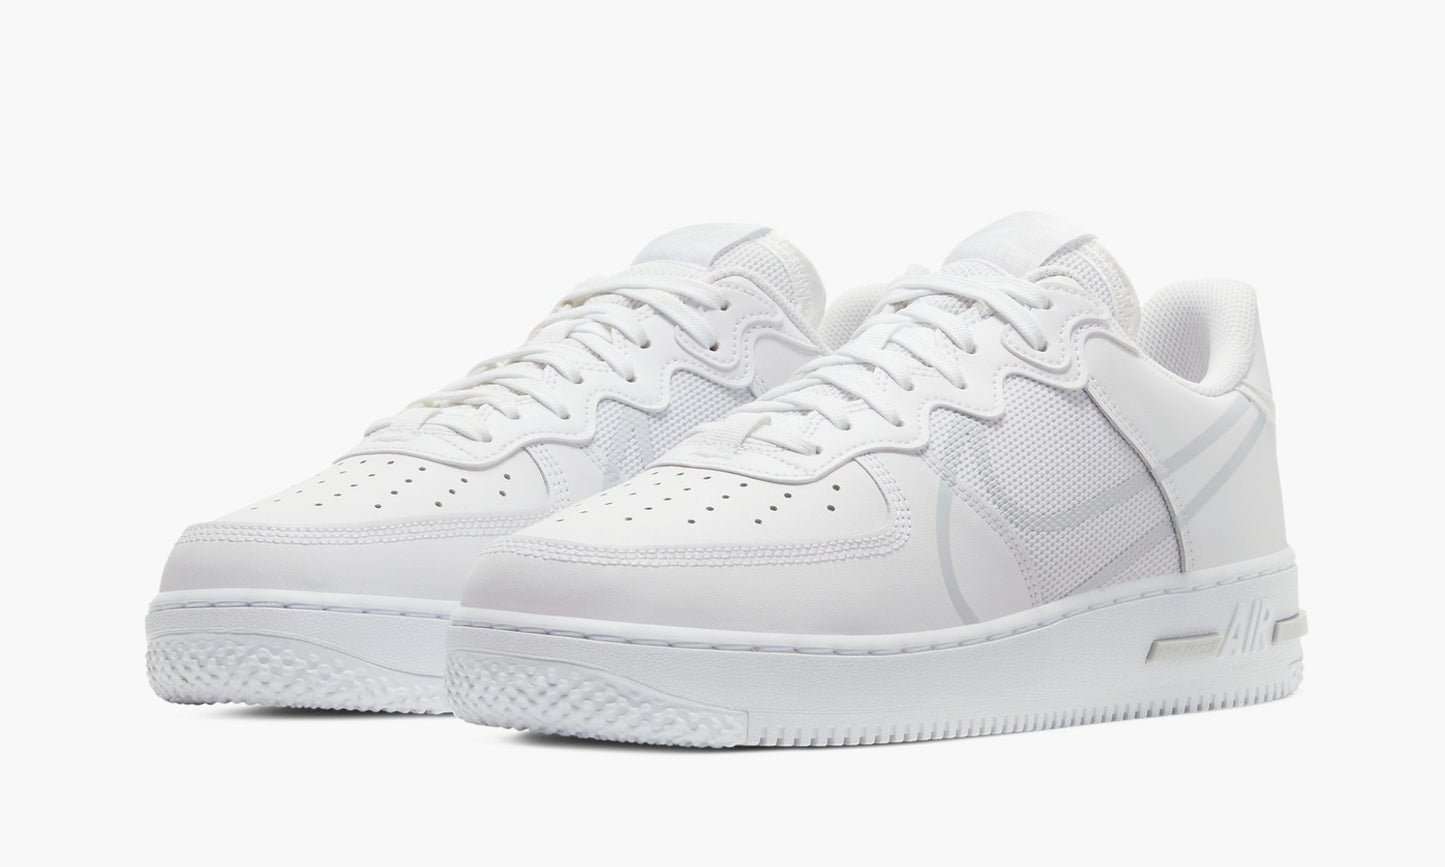 Air Force 1 Low React "White"